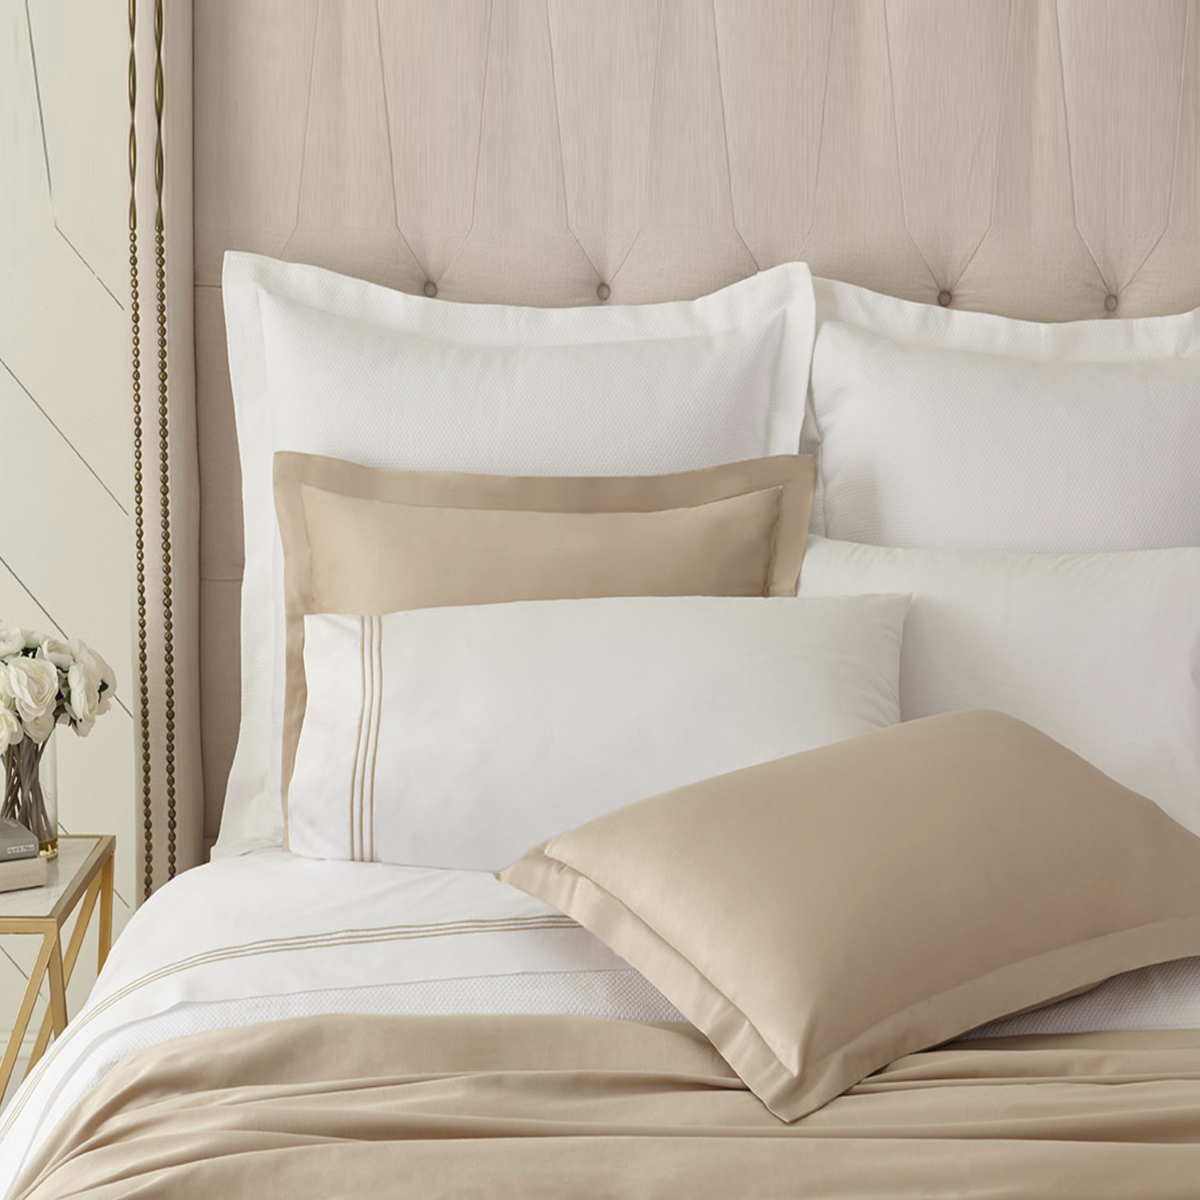 Duvet Set of Downtown Company Madison Bedding Collection in Taupe Color